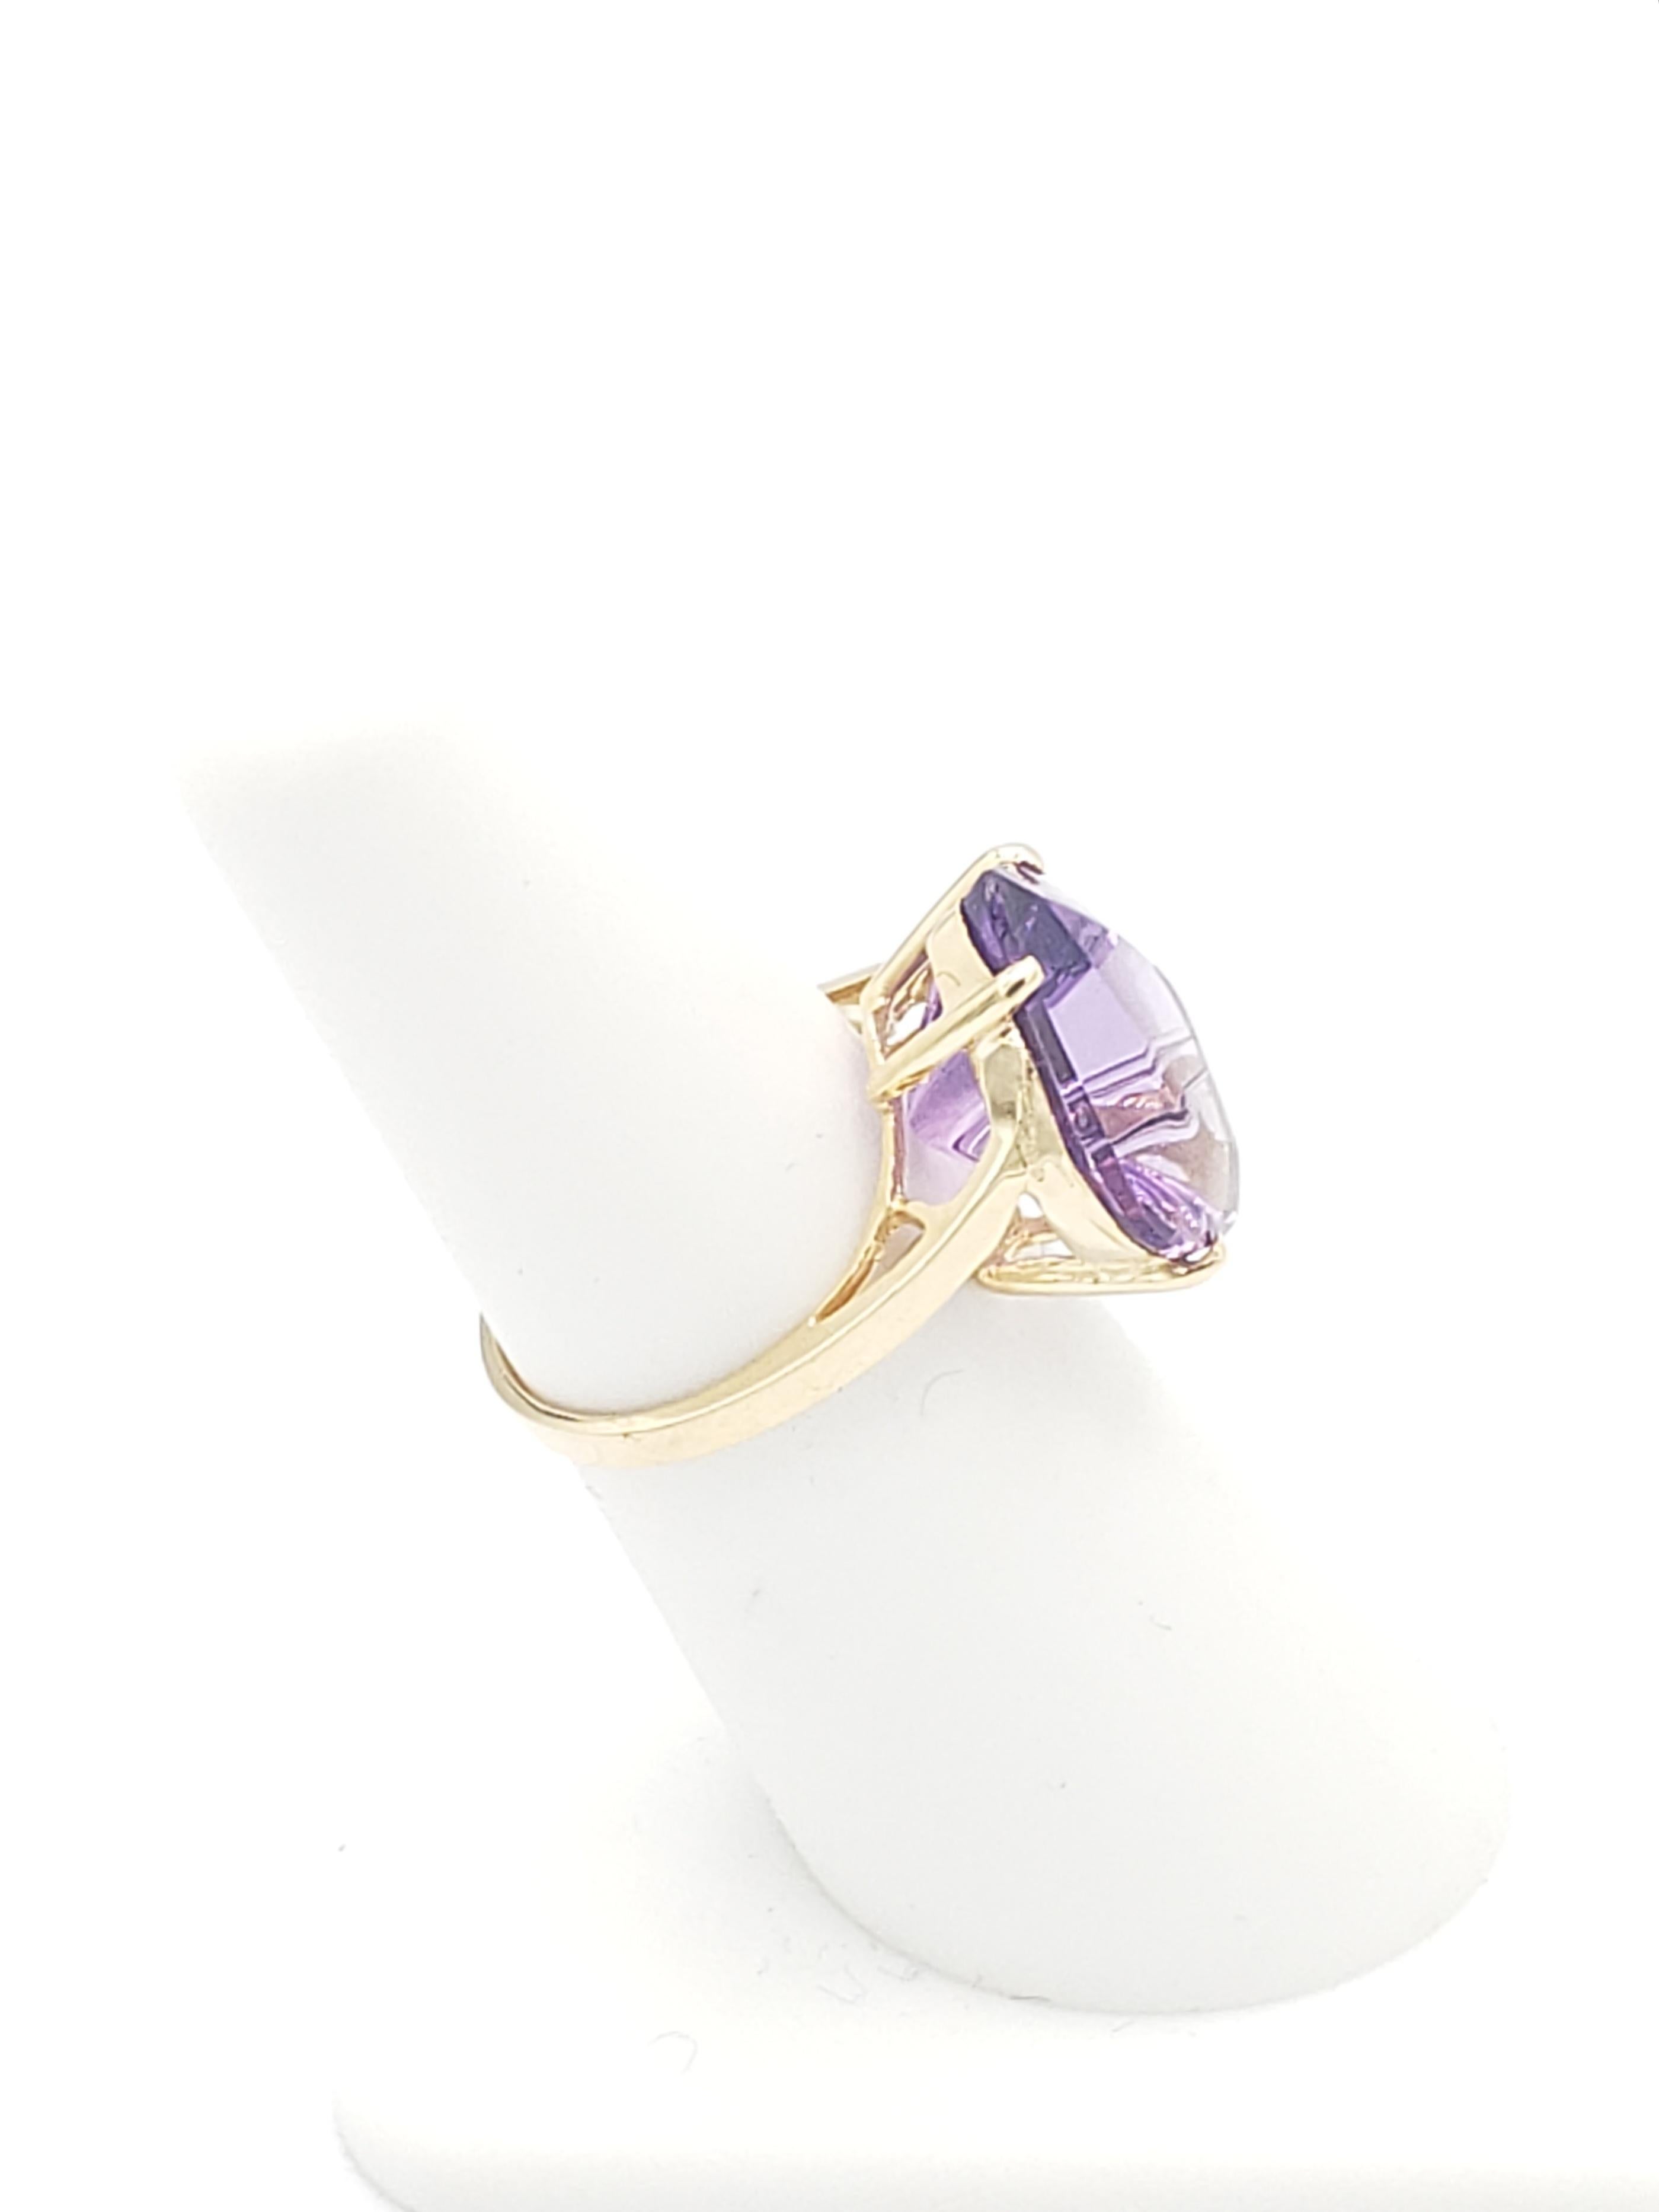 Women's or Men's NEW 8 Ct. Natural  Brazilian Amethyst Fantasy Cut Ring in 14k Yellow Gold New For Sale